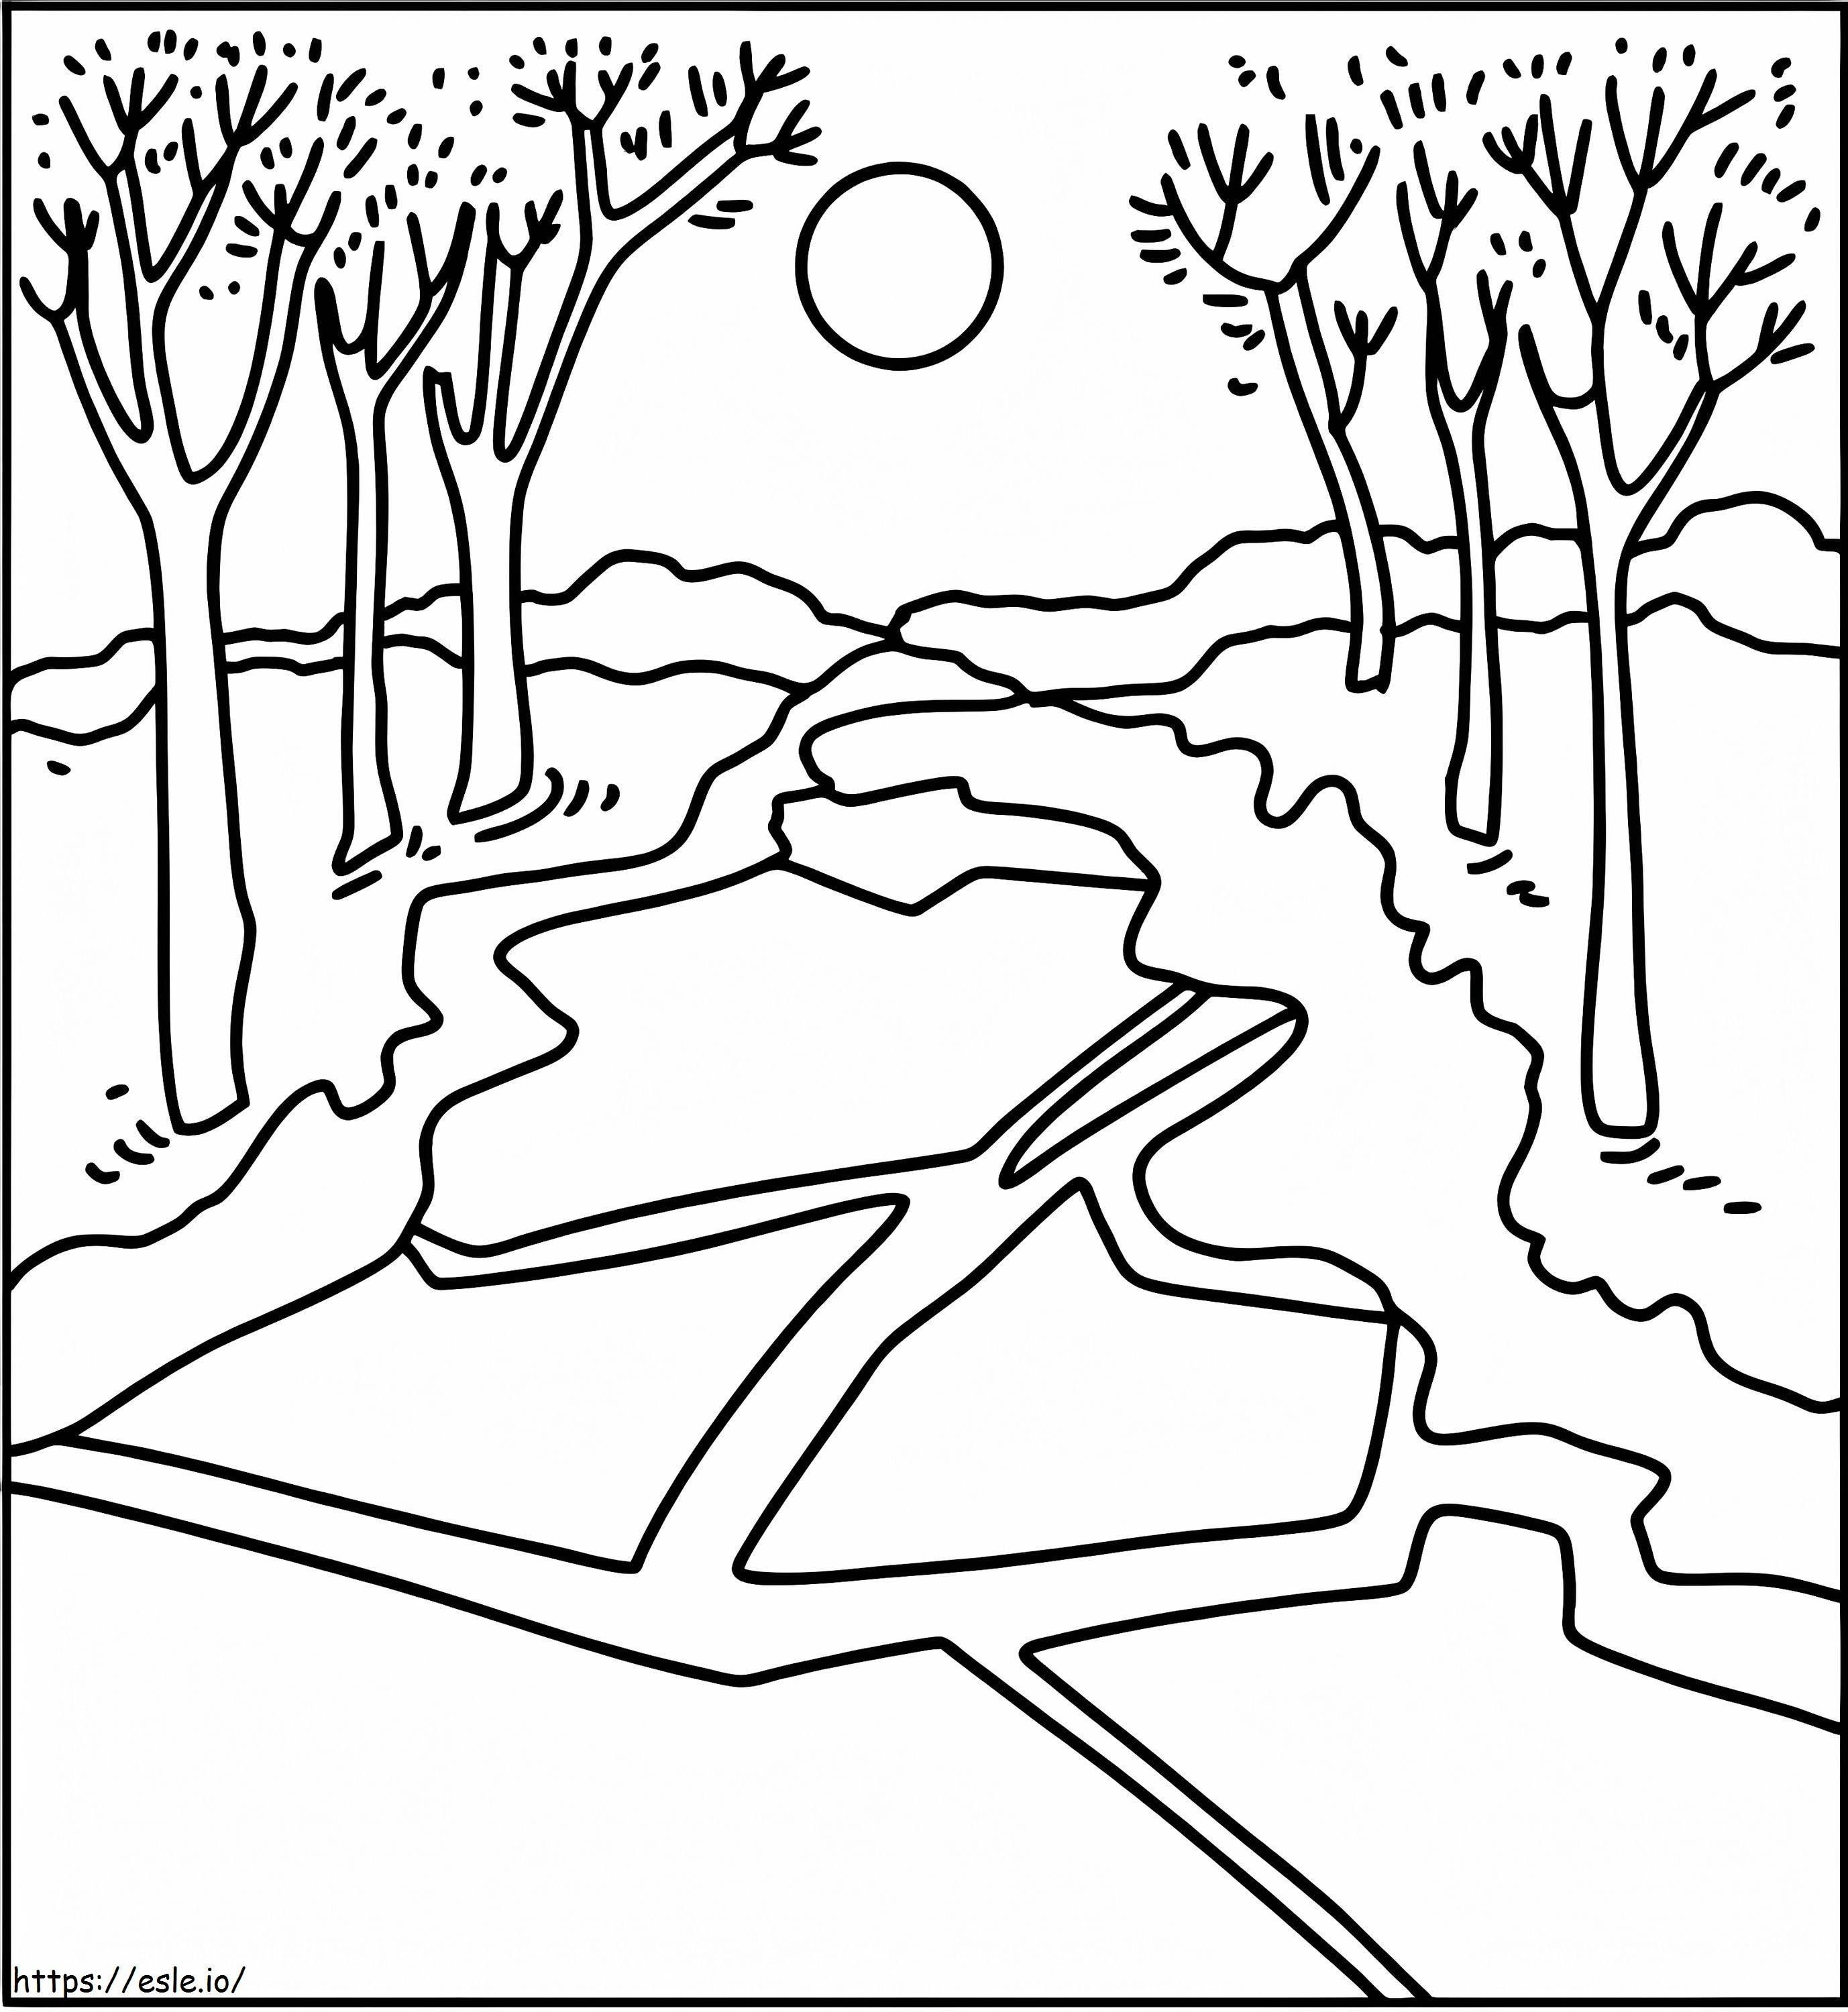 Spring River coloring page